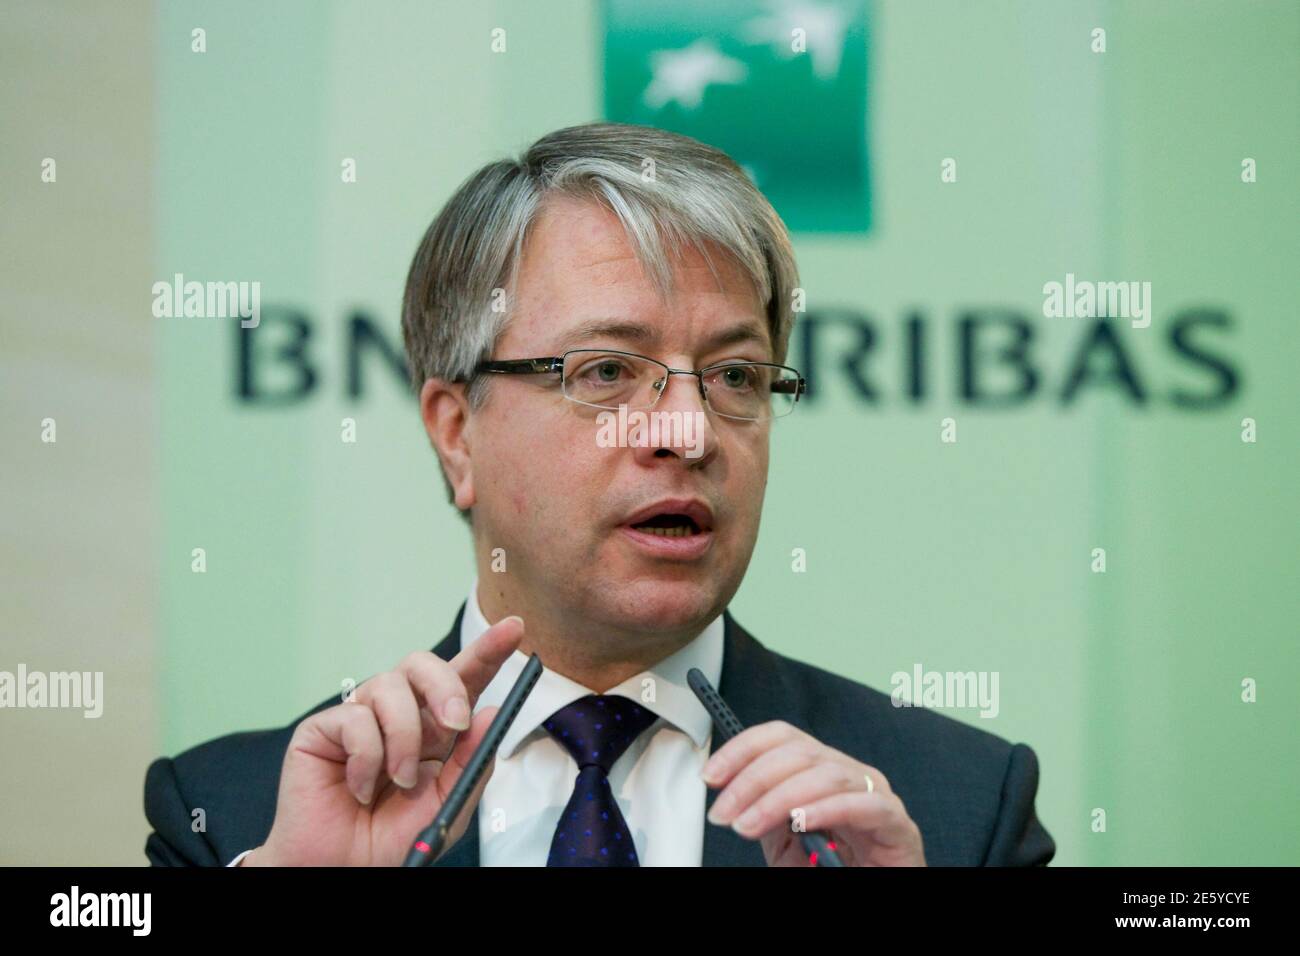 BNP Paribas Chief Executive Jean-Laurent Bonnafe speaks during a news  conference to present the bank's 2014 annual results in Paris, February 5,  2015. BNP Paribas, France's largest bank, said on Thursday that